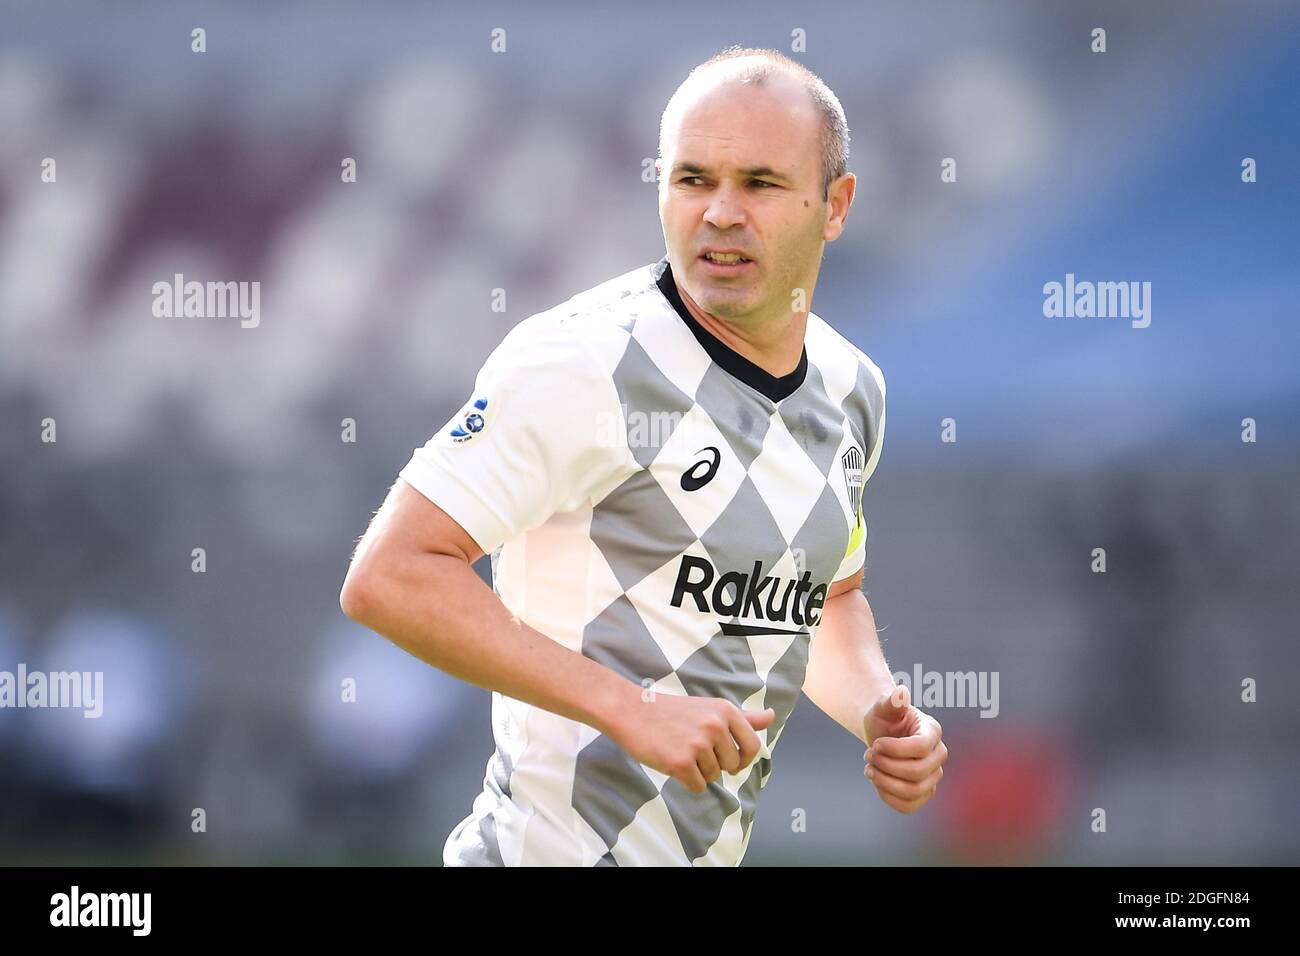 Spanish professional footballer Andrés Iniesta of Vissel Kobe reacts during the group match of 20/21 AFC Champions League (ACL) against Guangzhou Ever Stock Photo